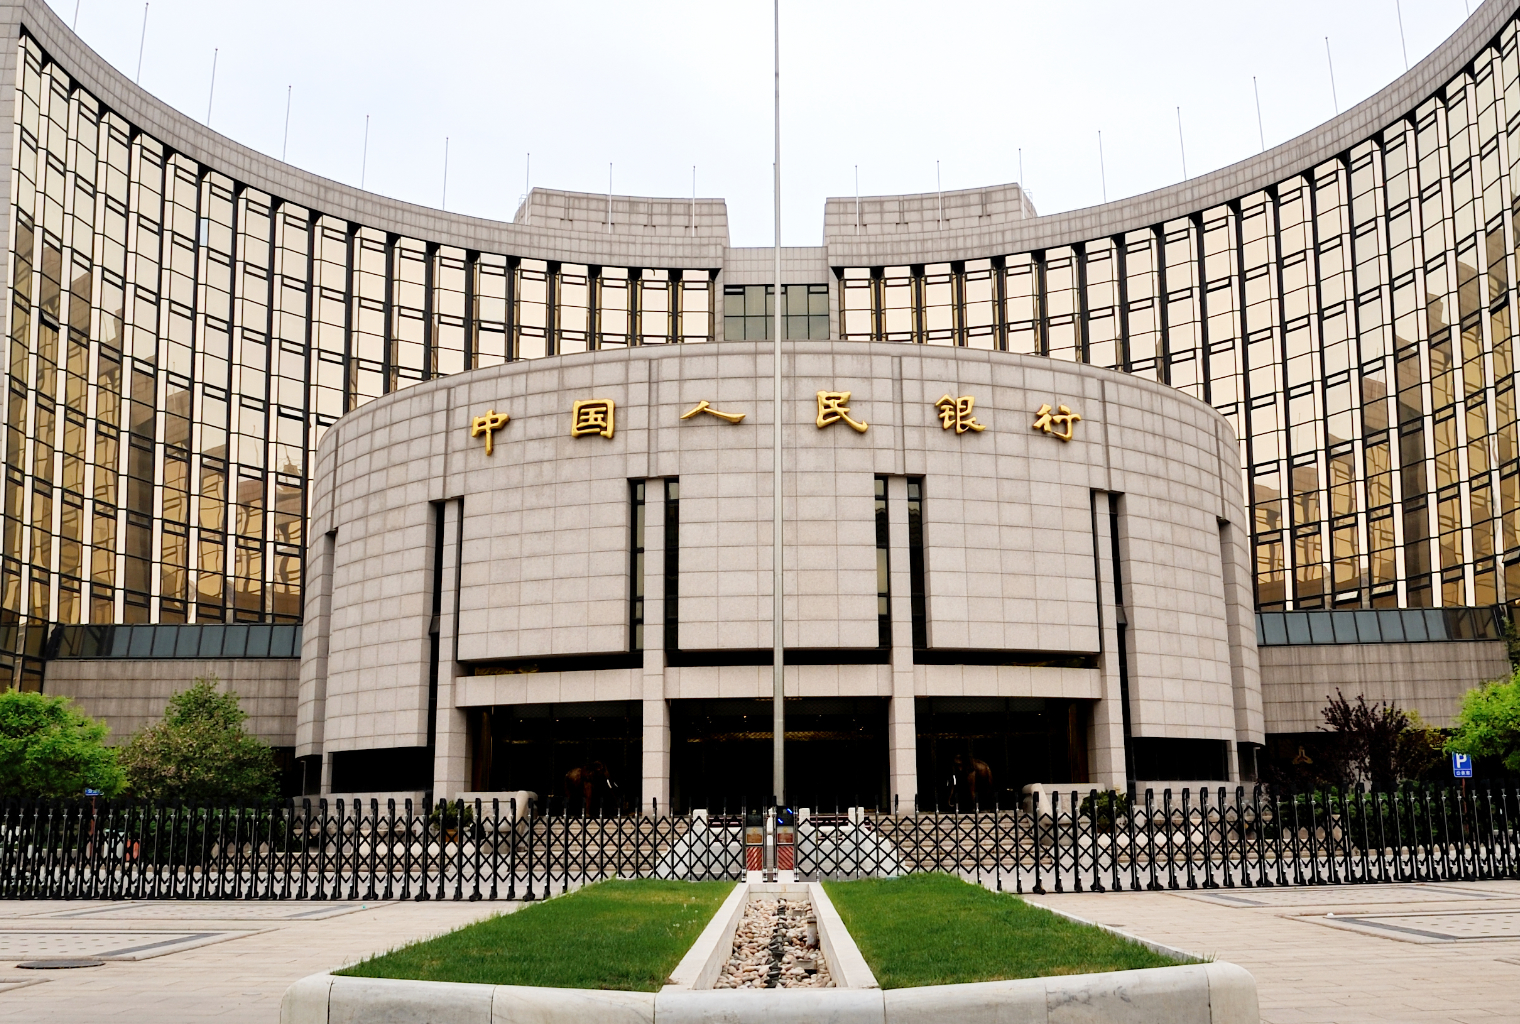 84 PBOC Digital Currency Patents Show the Extent of China's Digital Yuan